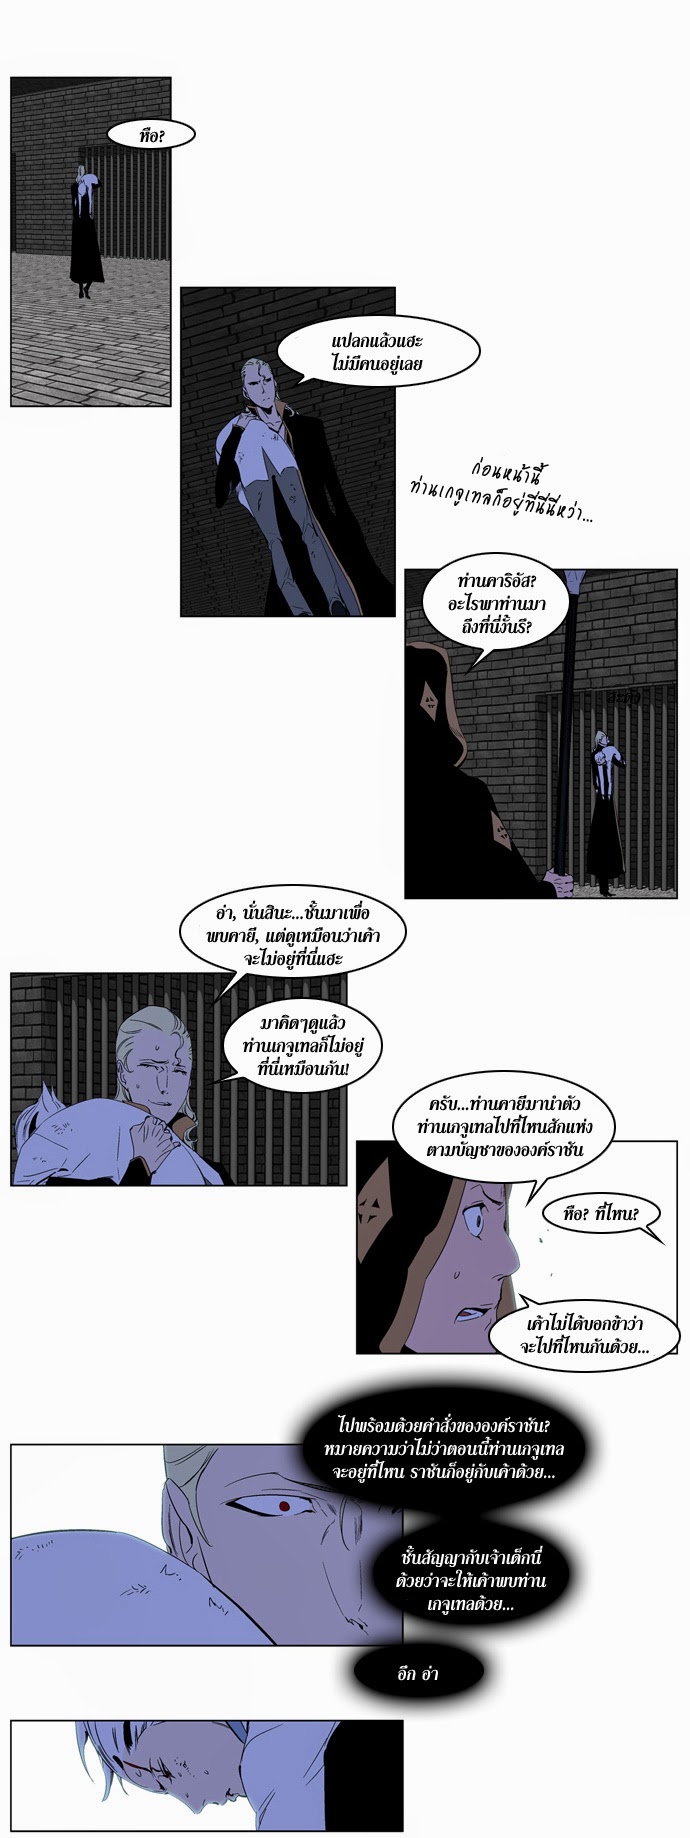 Noblesse 191 004